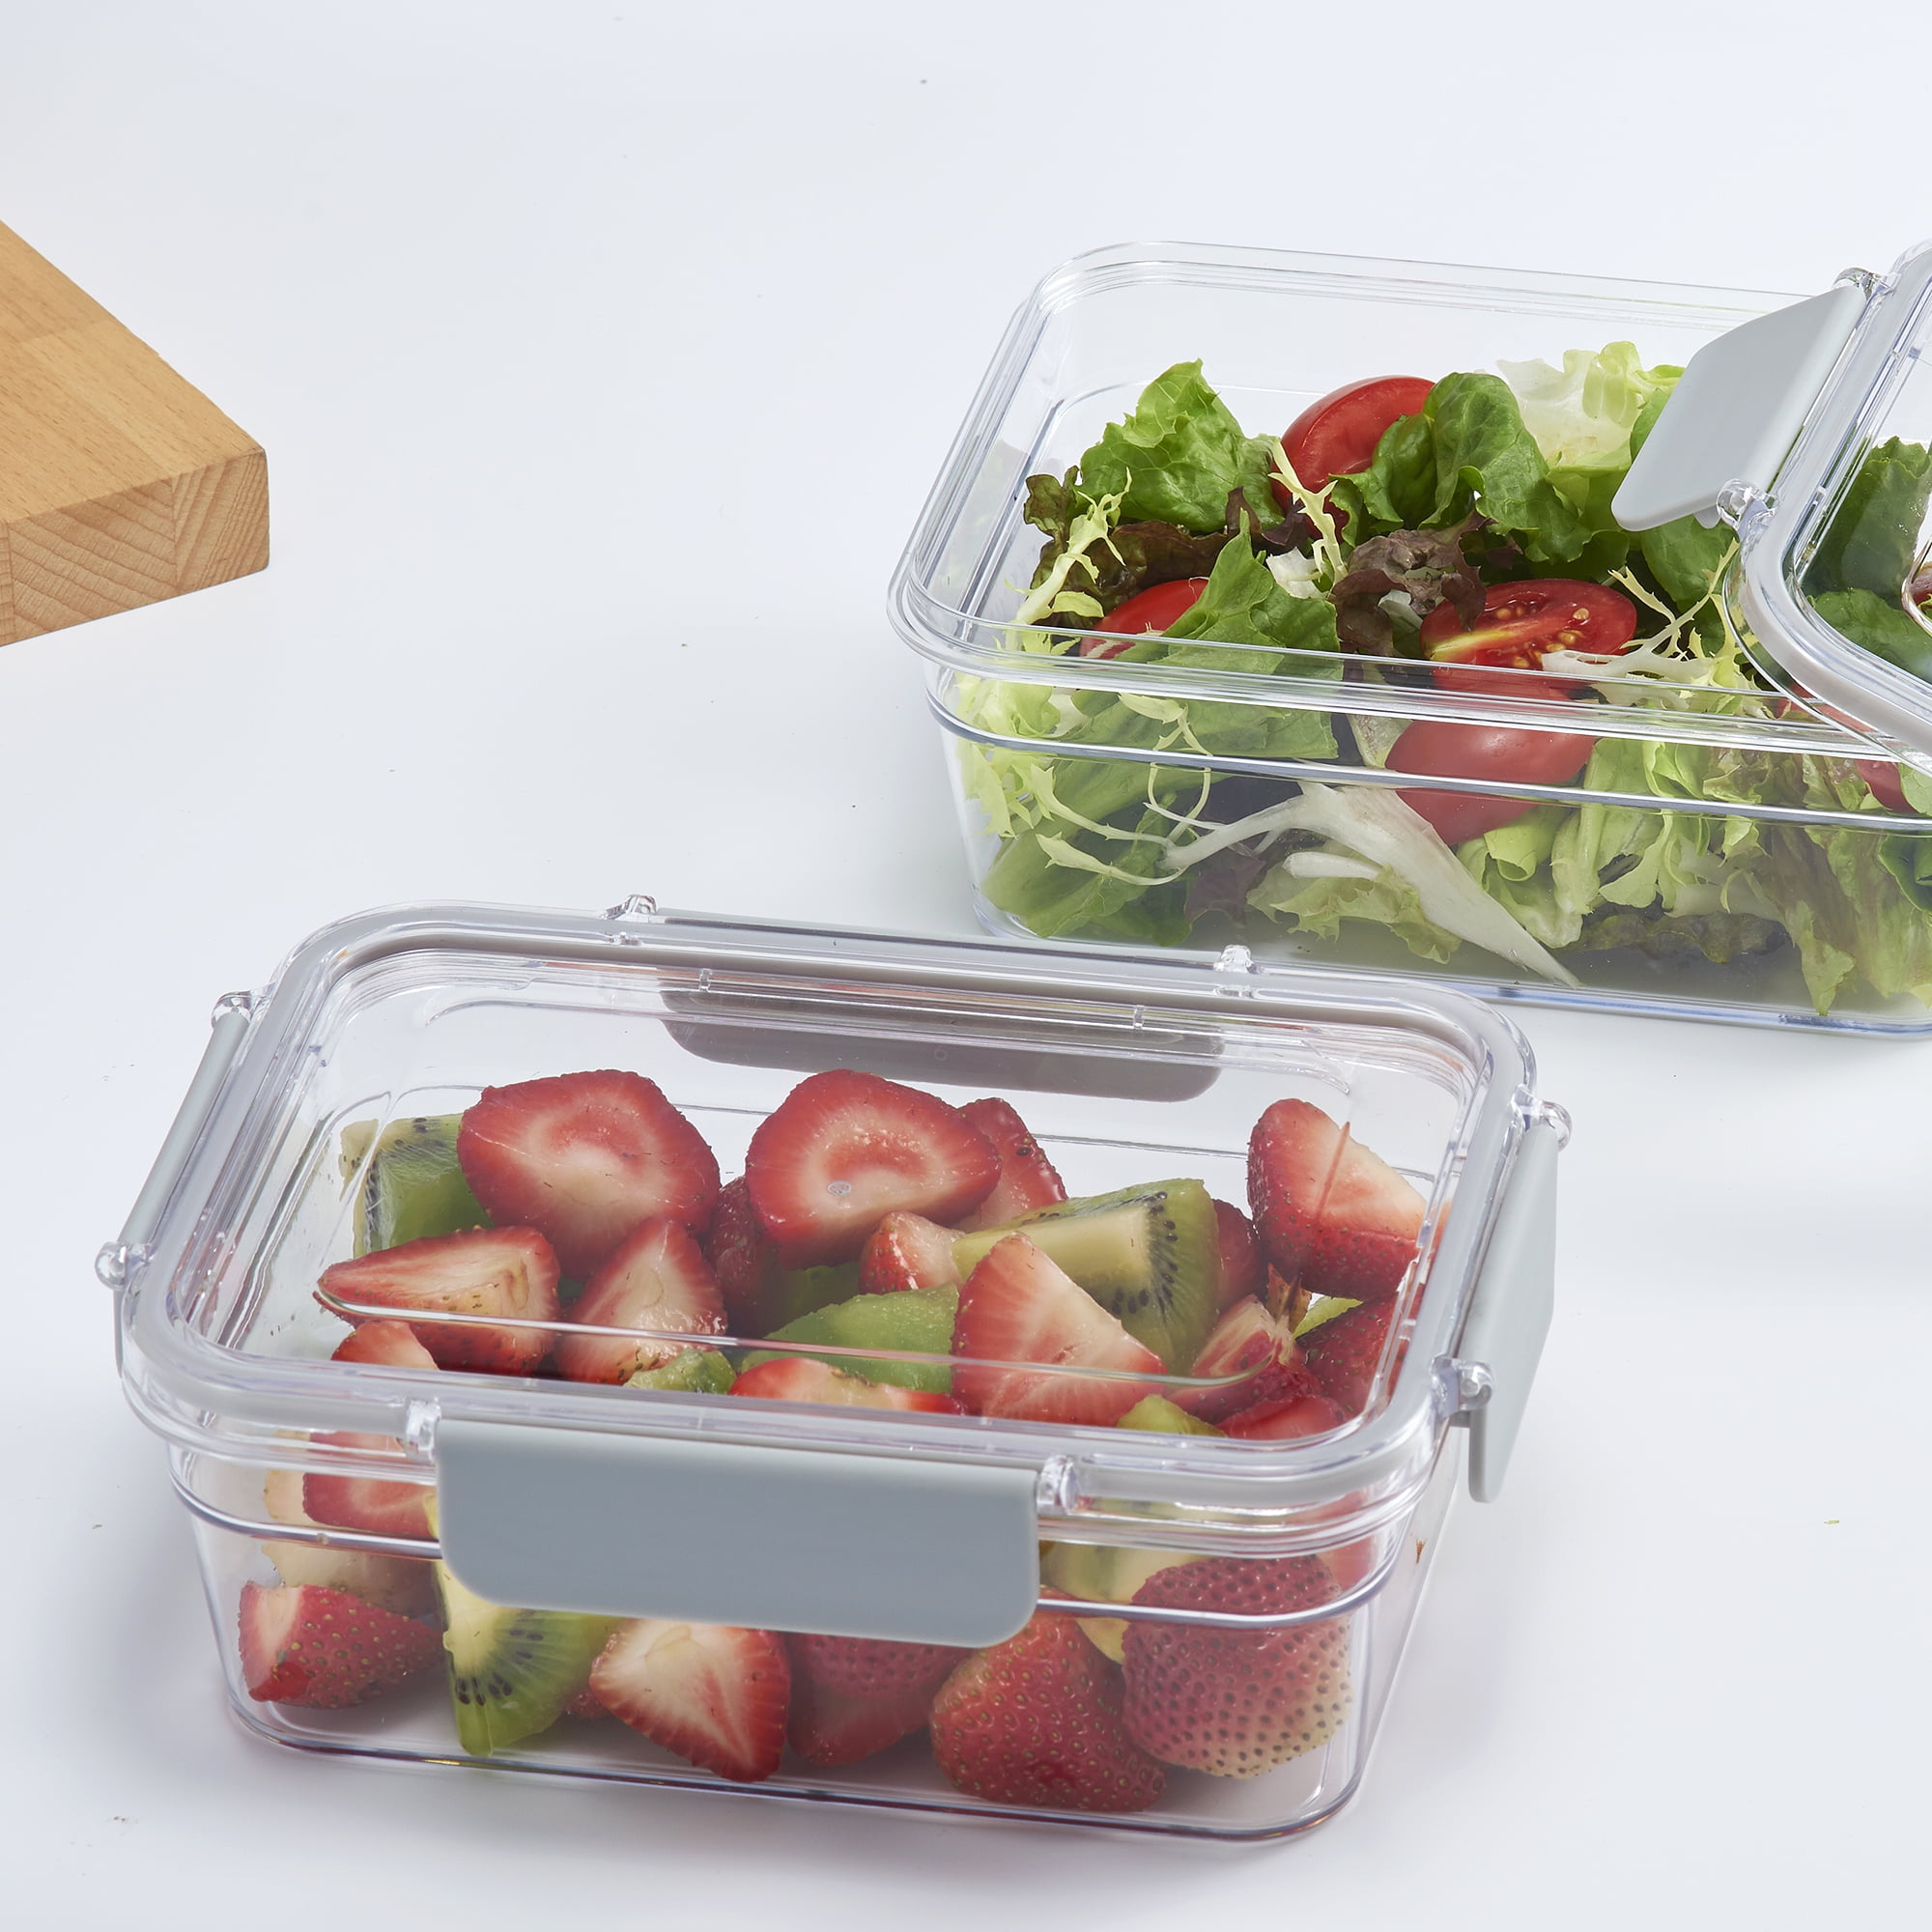 Mainstays Rectangular Tritan Stain-Proof Food Storage Container, 1300ml, Set of 2, Size: One size, Clear